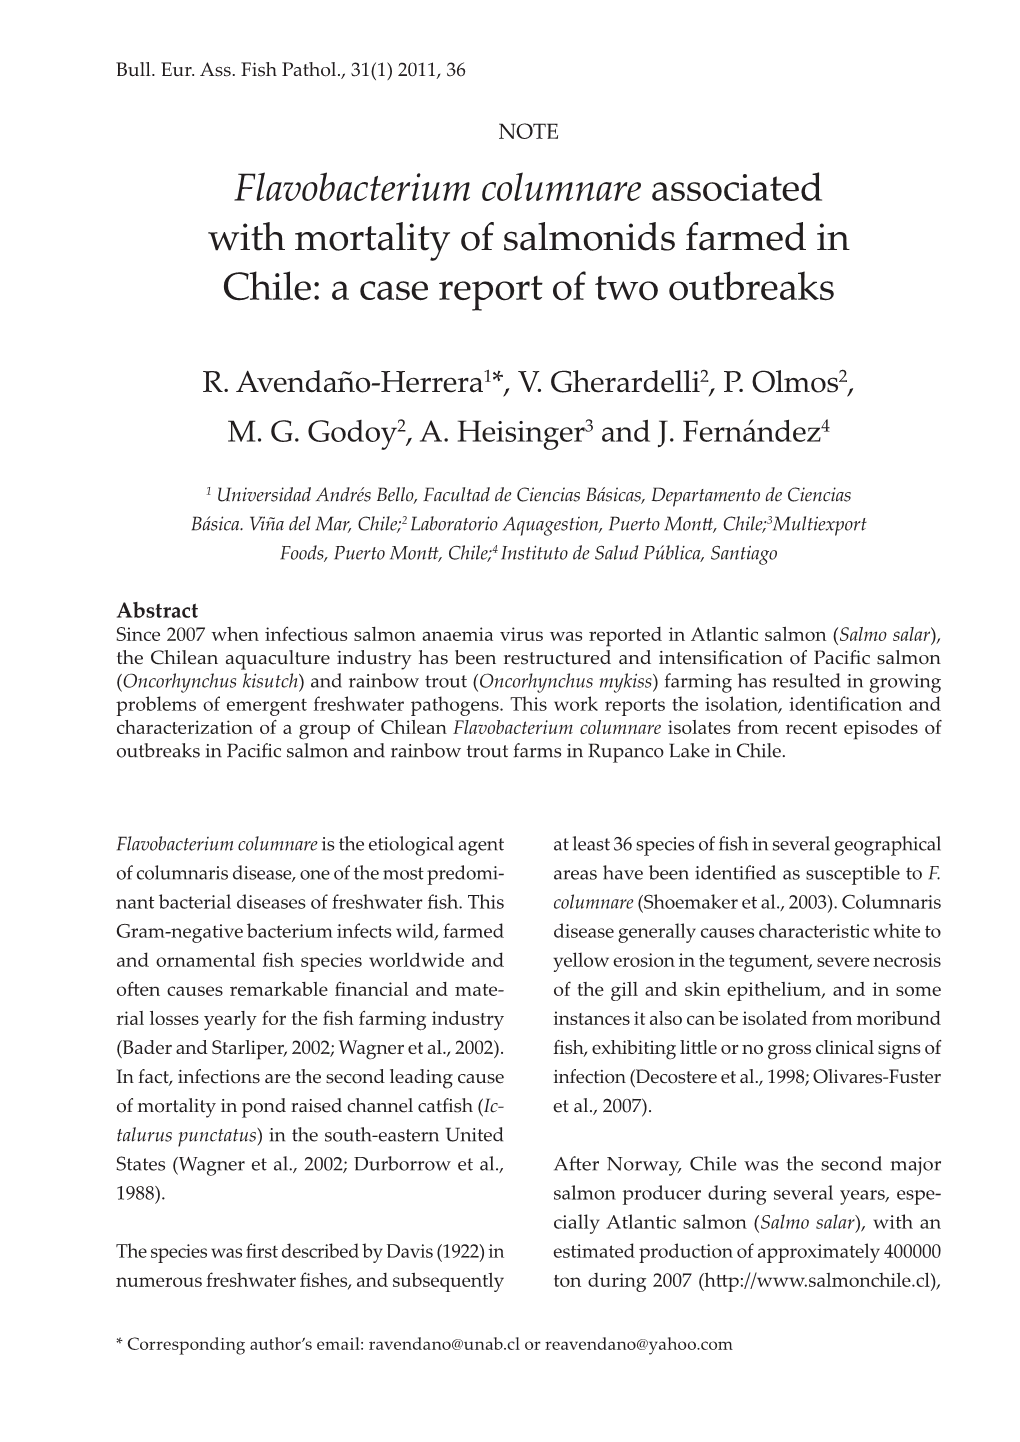 Flavobacterium Columnare Associated with Mortality of Salmonids Farmed in Chile: a Case Report of Two Outbreaks